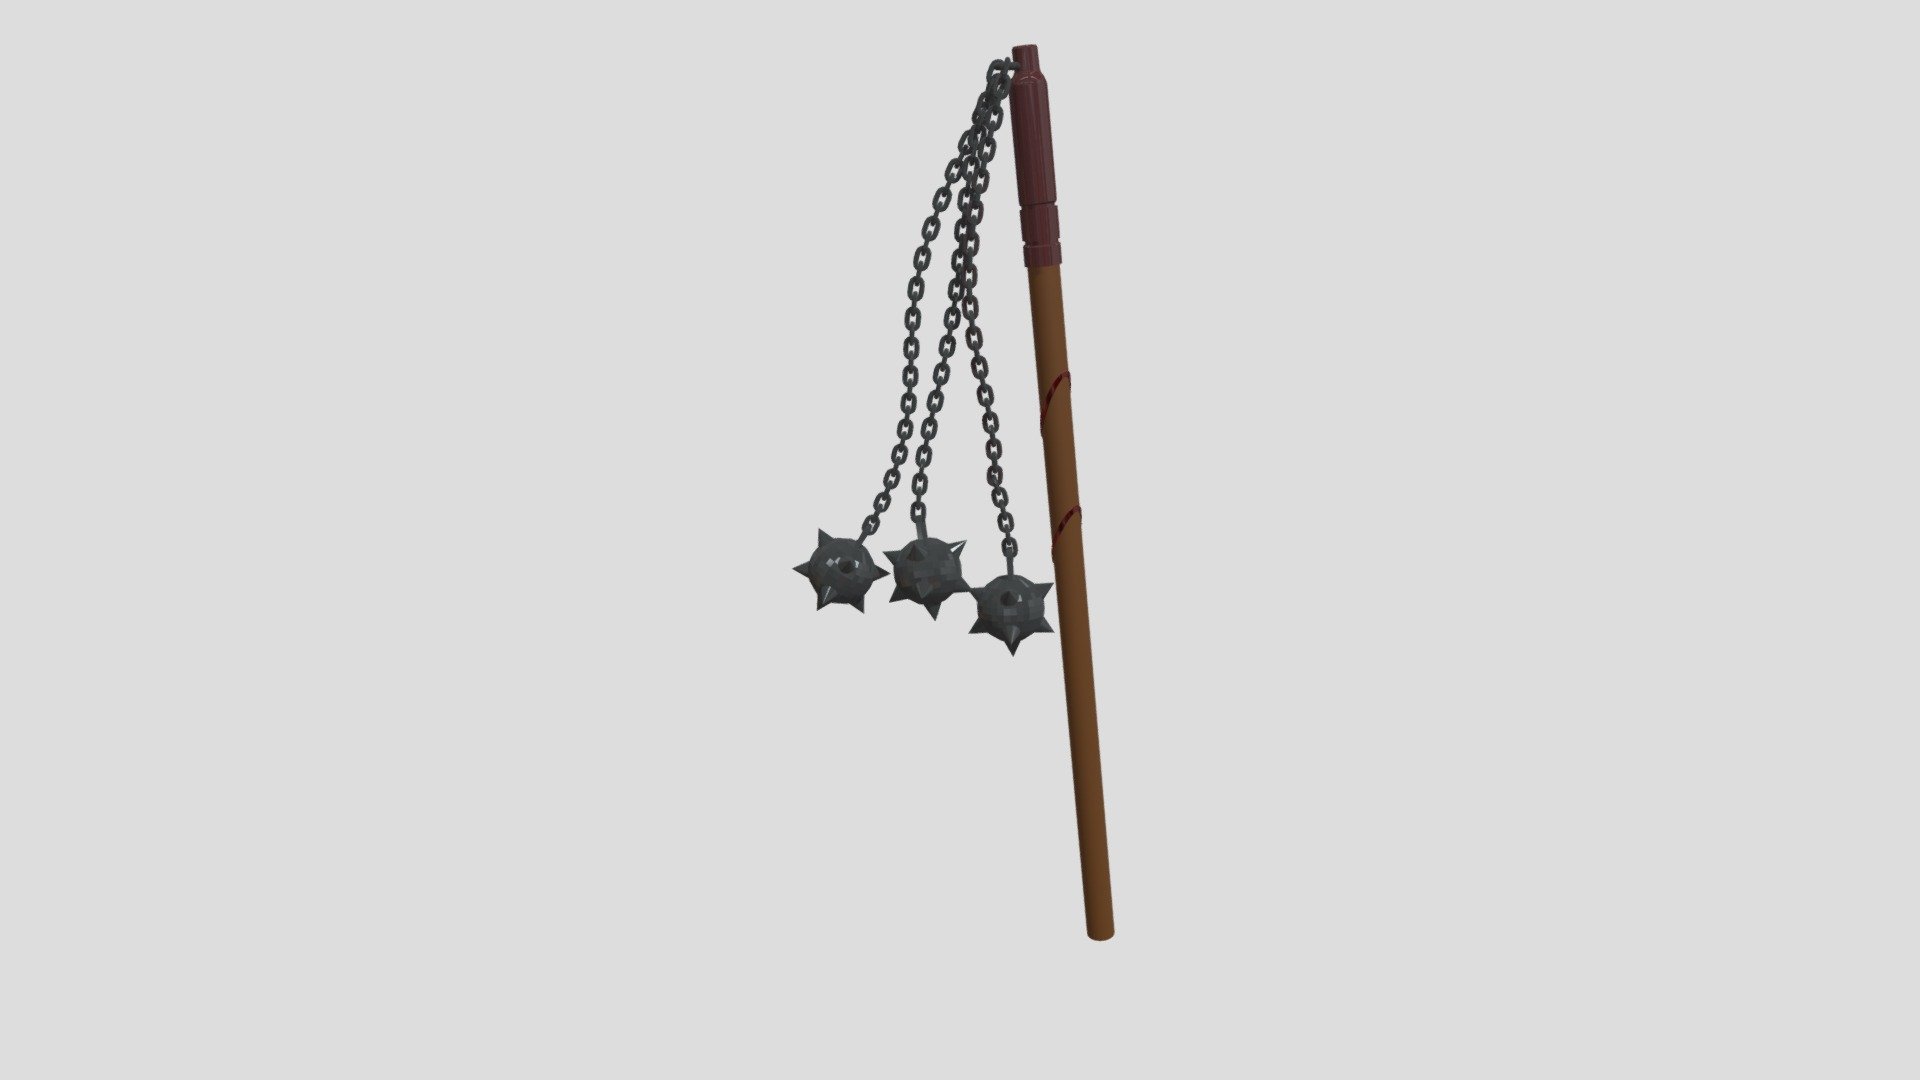 A Stylize Flail with metal spiked-balls one of the ancient weapon
game ready
Stylized
Weapons
Props
3D
Digital
Flail
Mace
metal
spiked-ball - Mace 3 Spiked Balls, FLAIL - Download Free 3D model by abdullahussain01 3d model